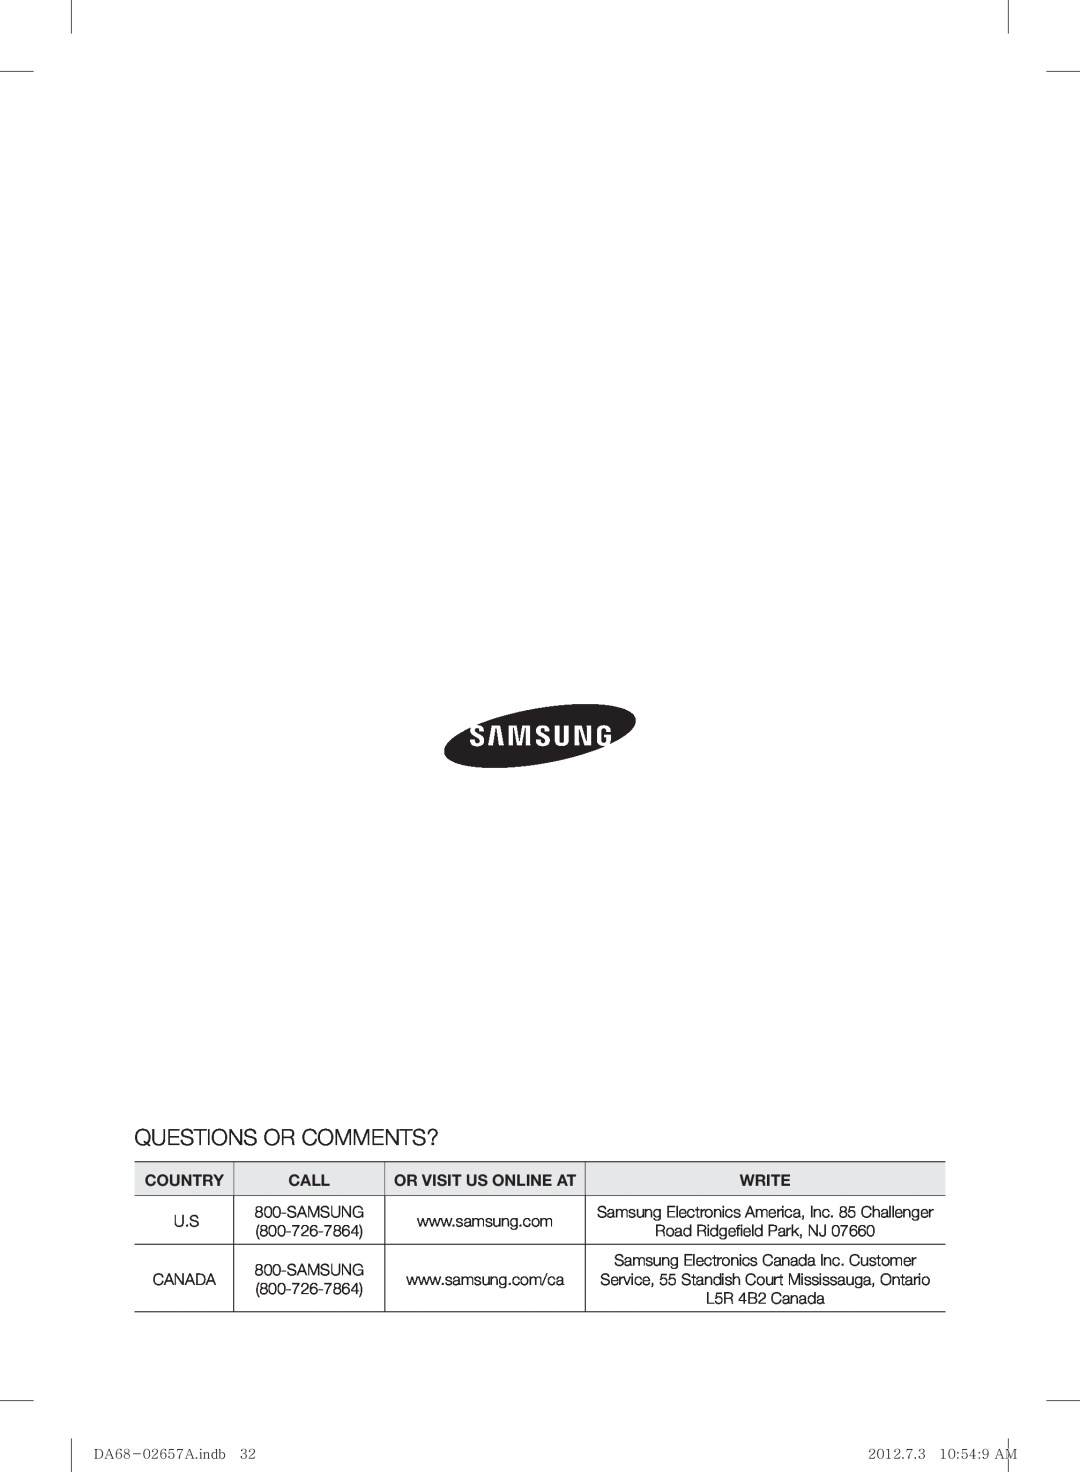 Samsung RF221NCTABC user manual Questions Or Comments?, Country, Call, Or Visit Us Online At, Write 